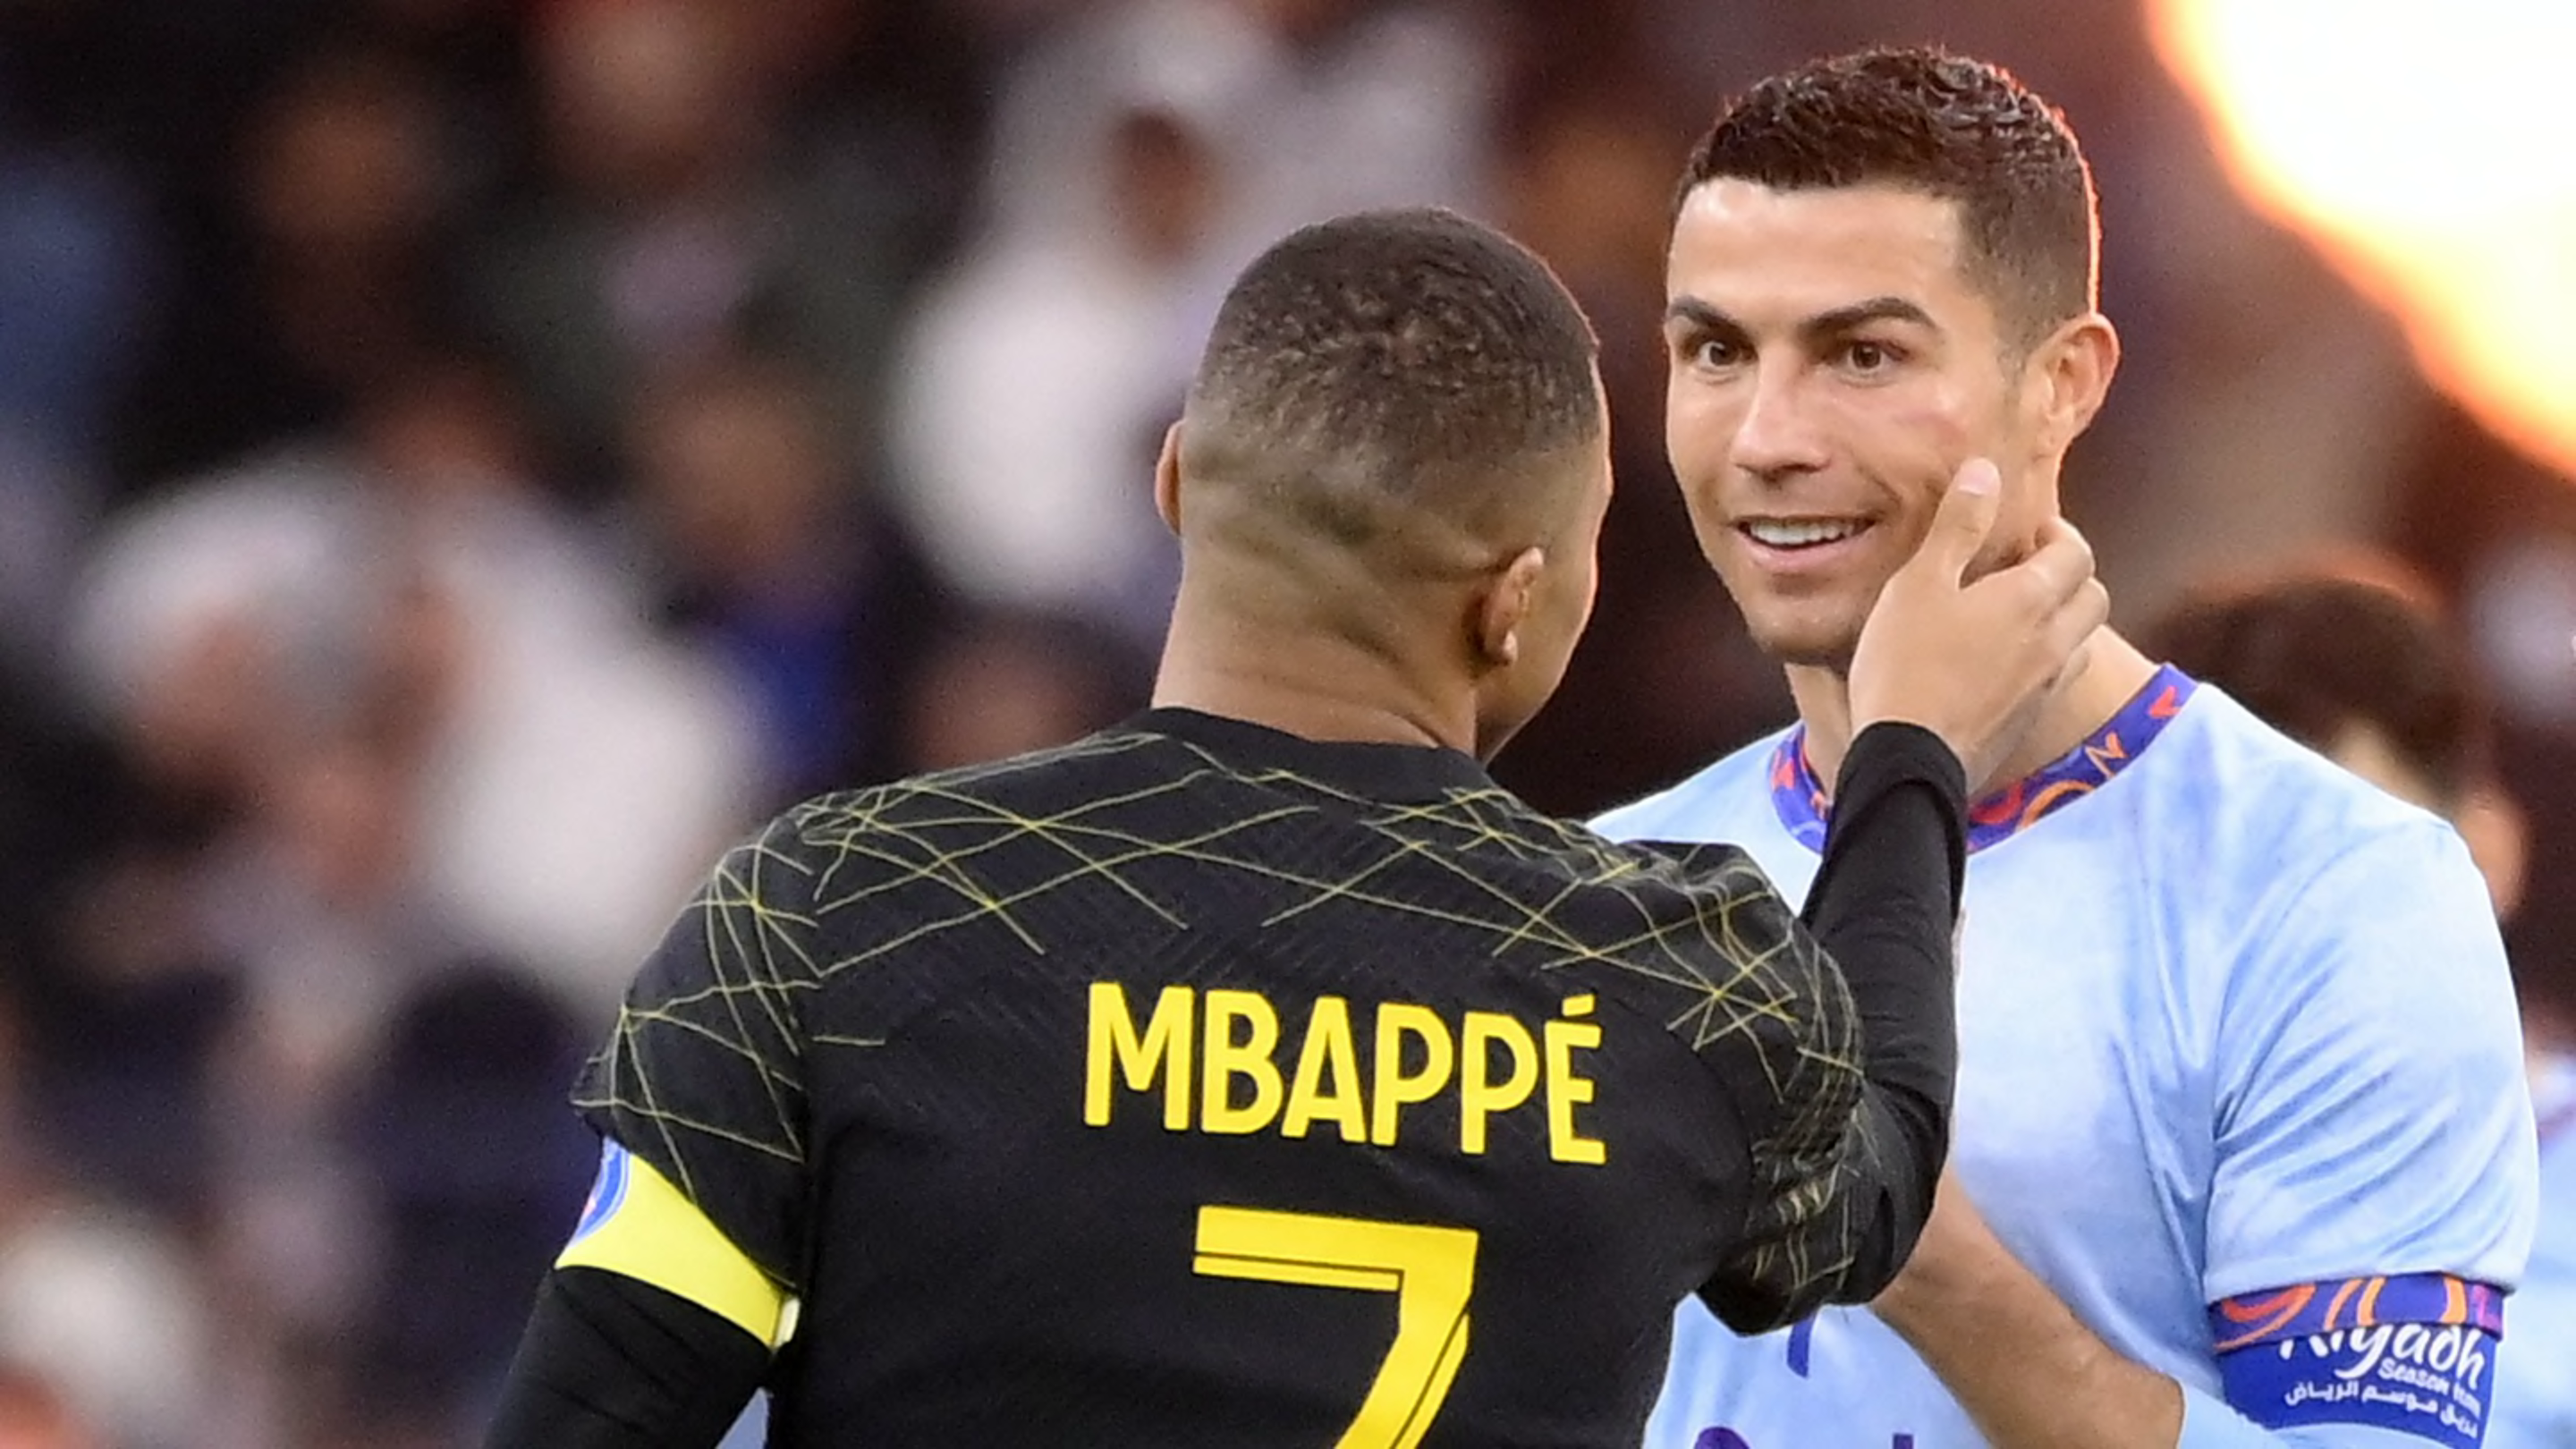 Cristiano Ronaldo sends message to Kylian Mbappe following Real Madrid move